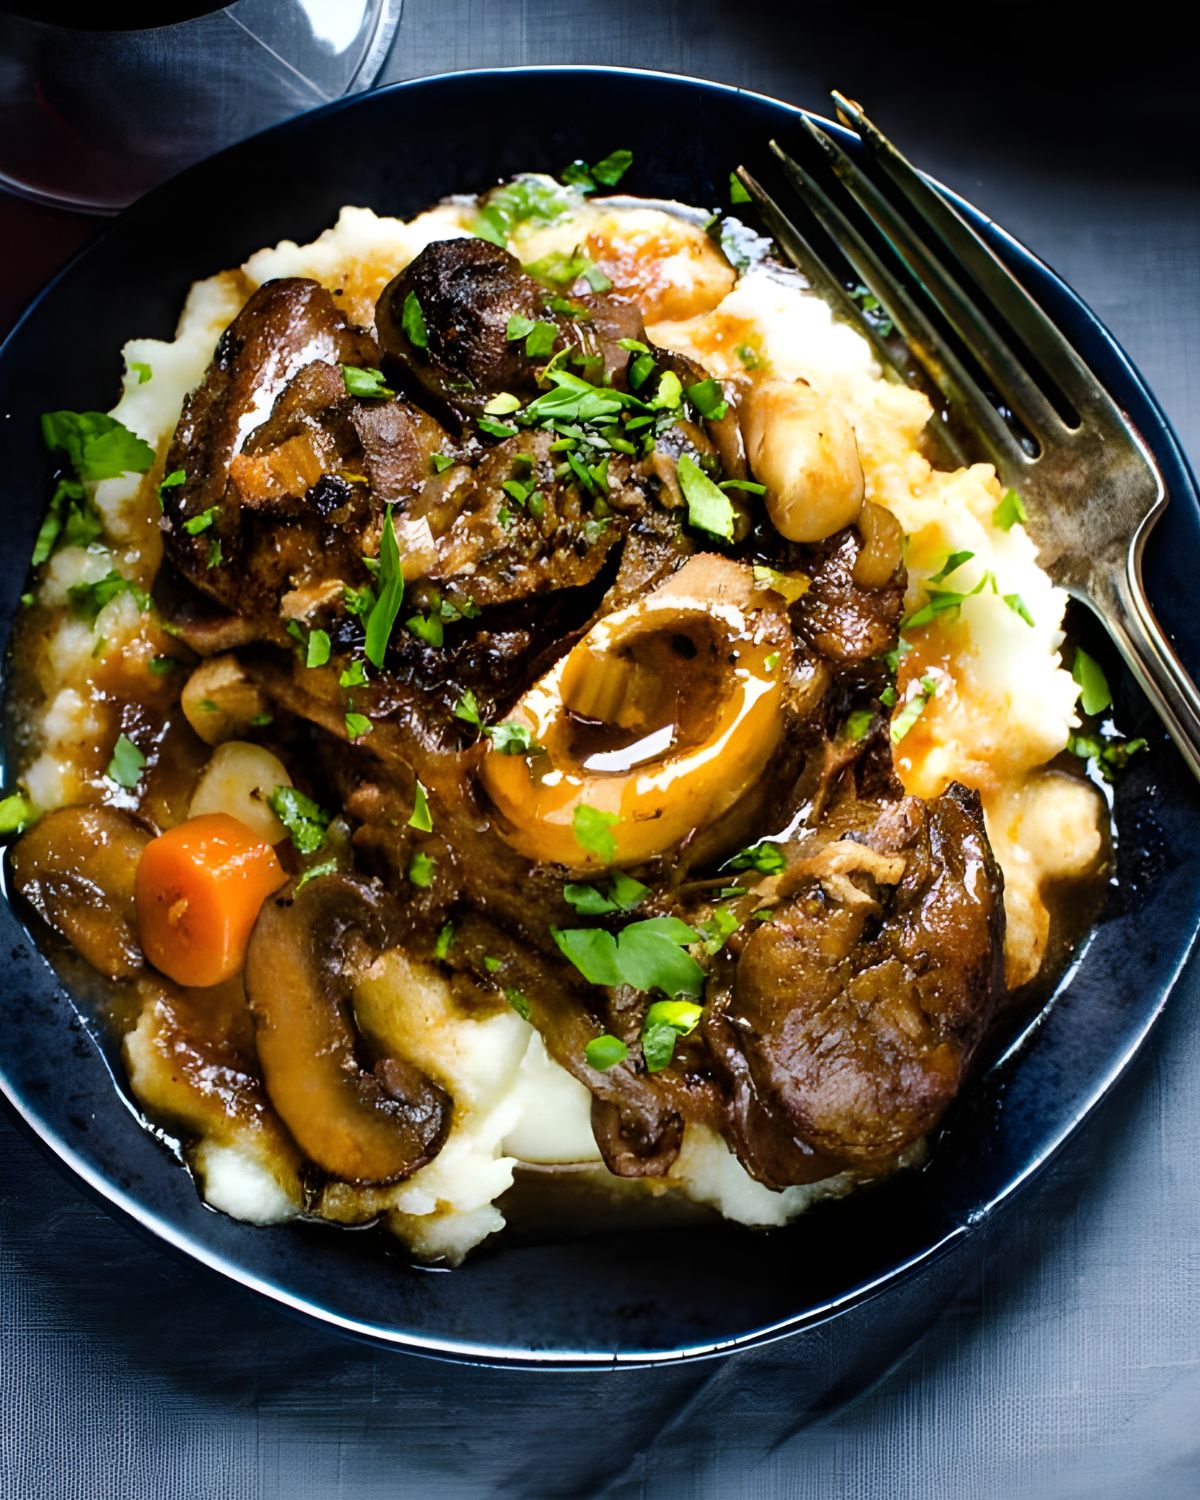 A plate of braised veal shanks over mashed potatoes.